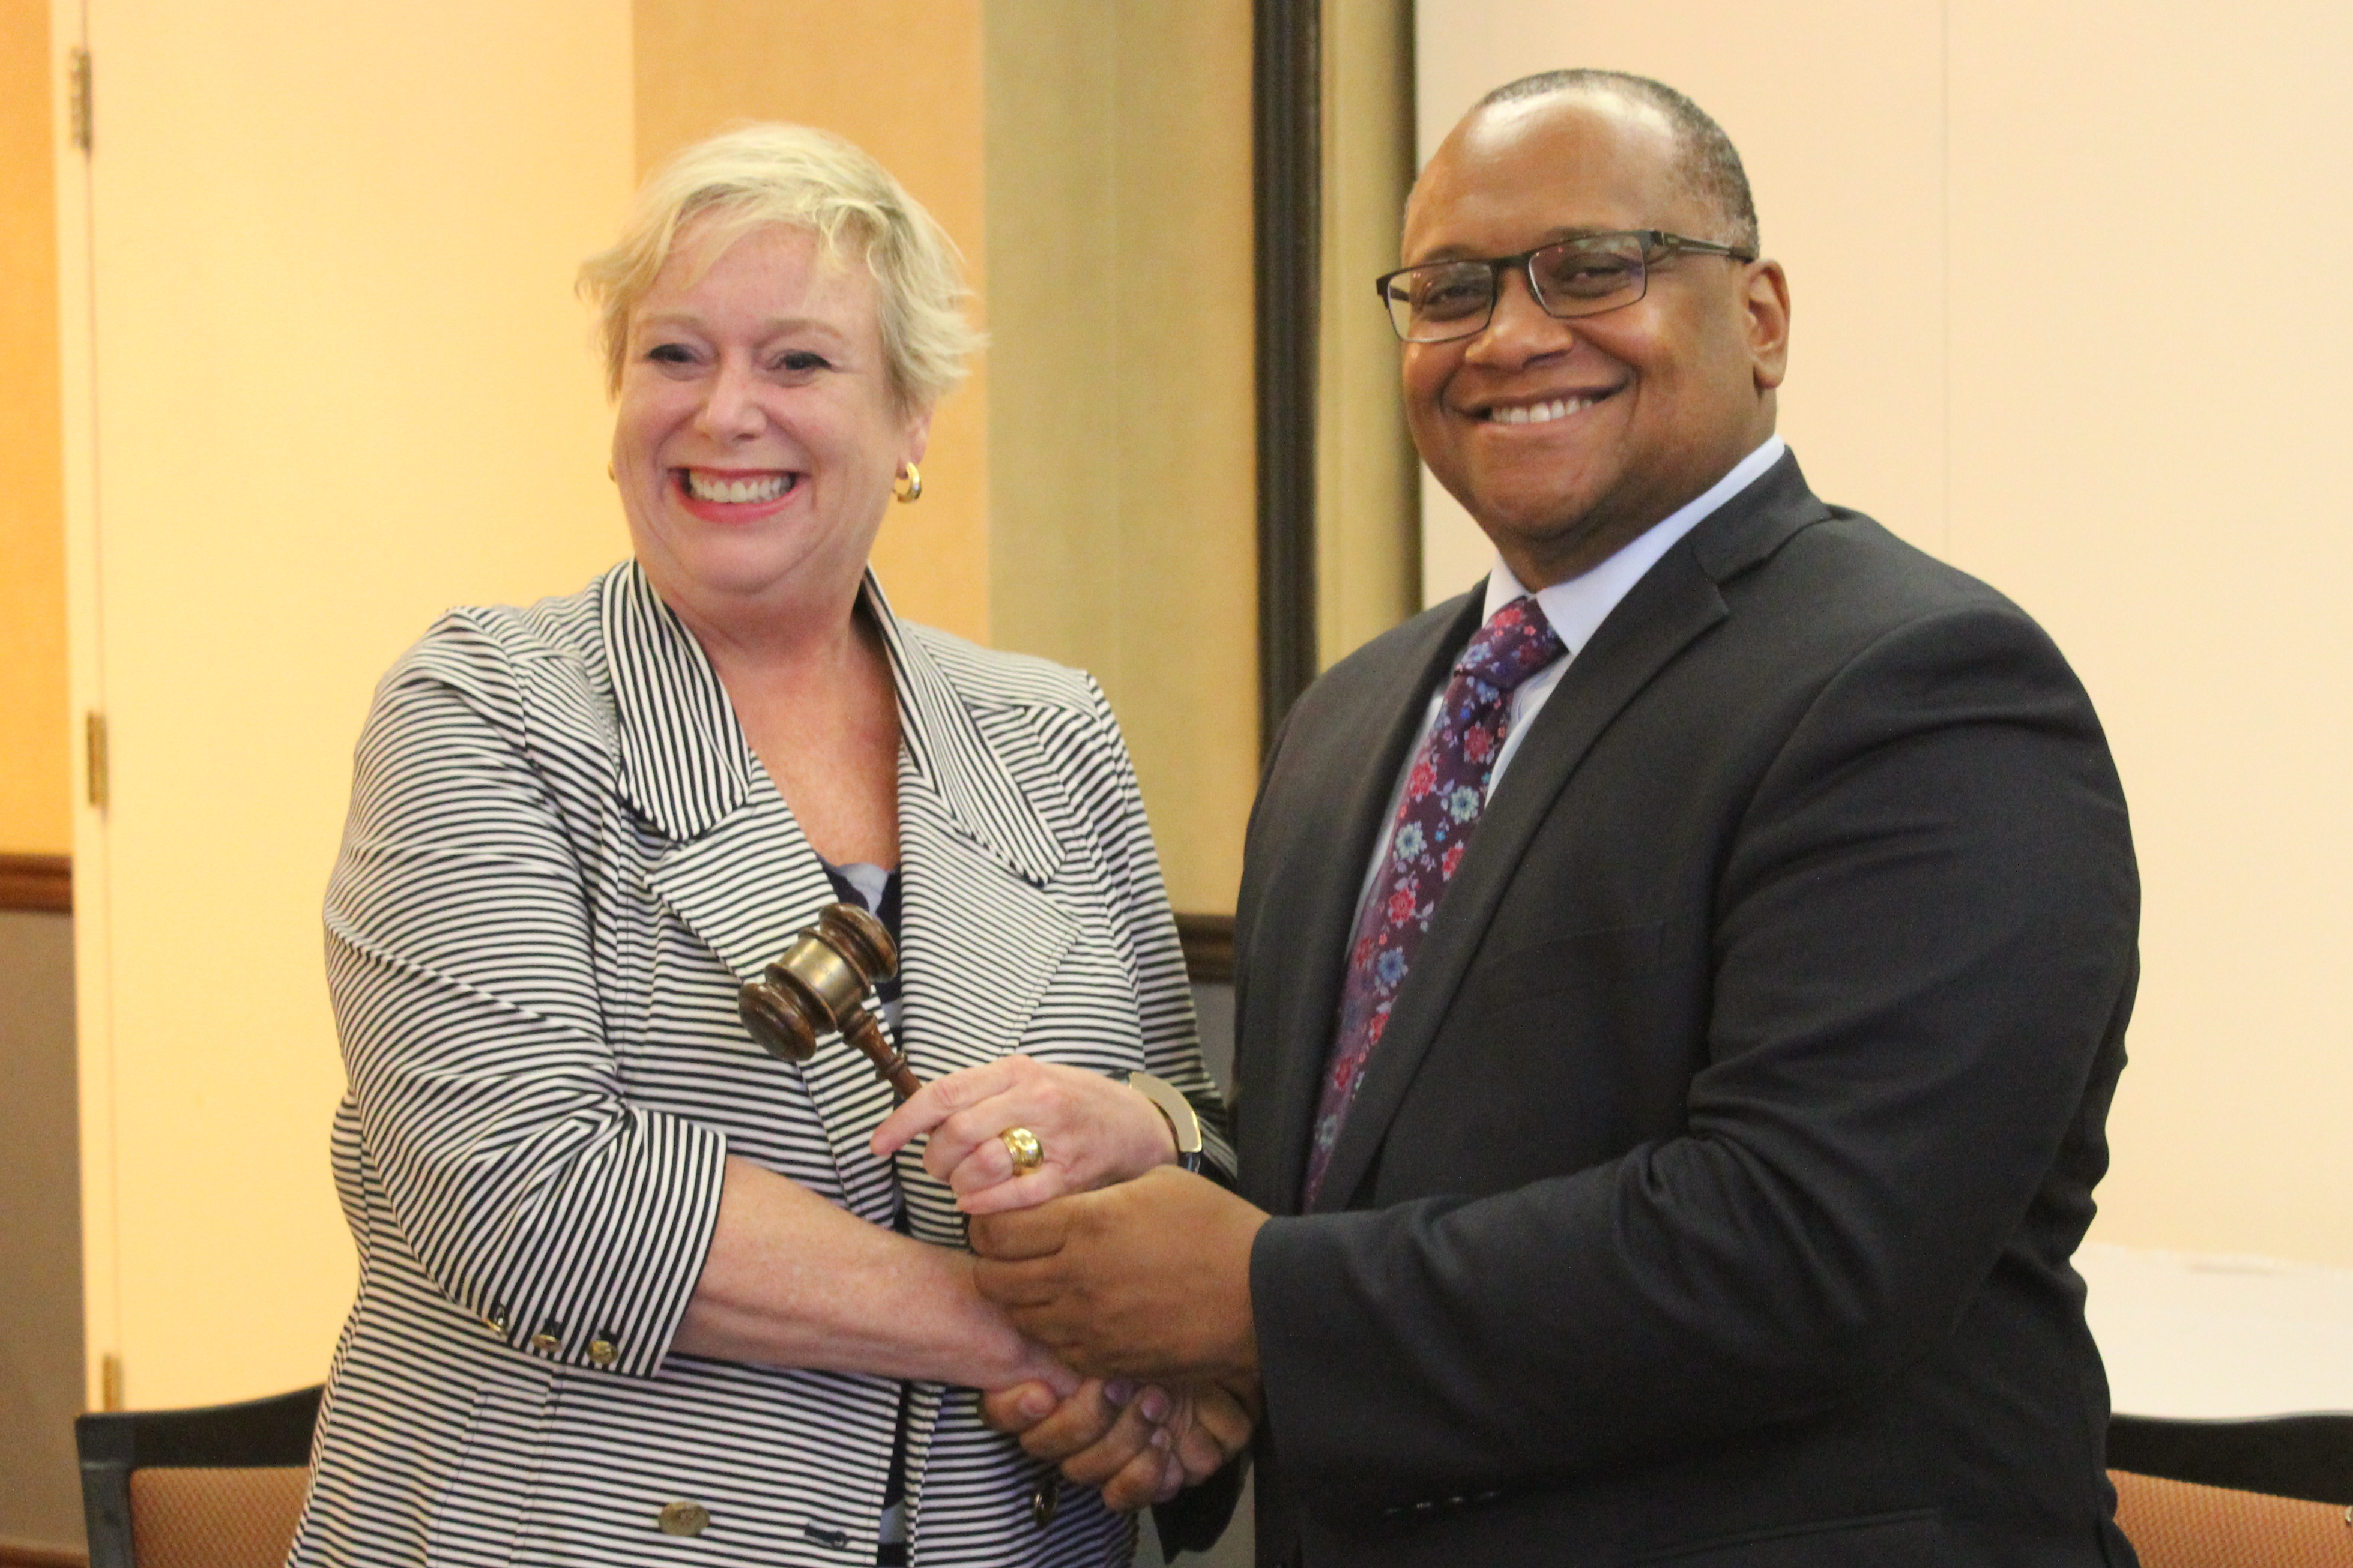 Deidre Depke, left, receives the ceremonial gavel from outgoing OPC President Marcus Mabry. Photo: Chad Bouchard